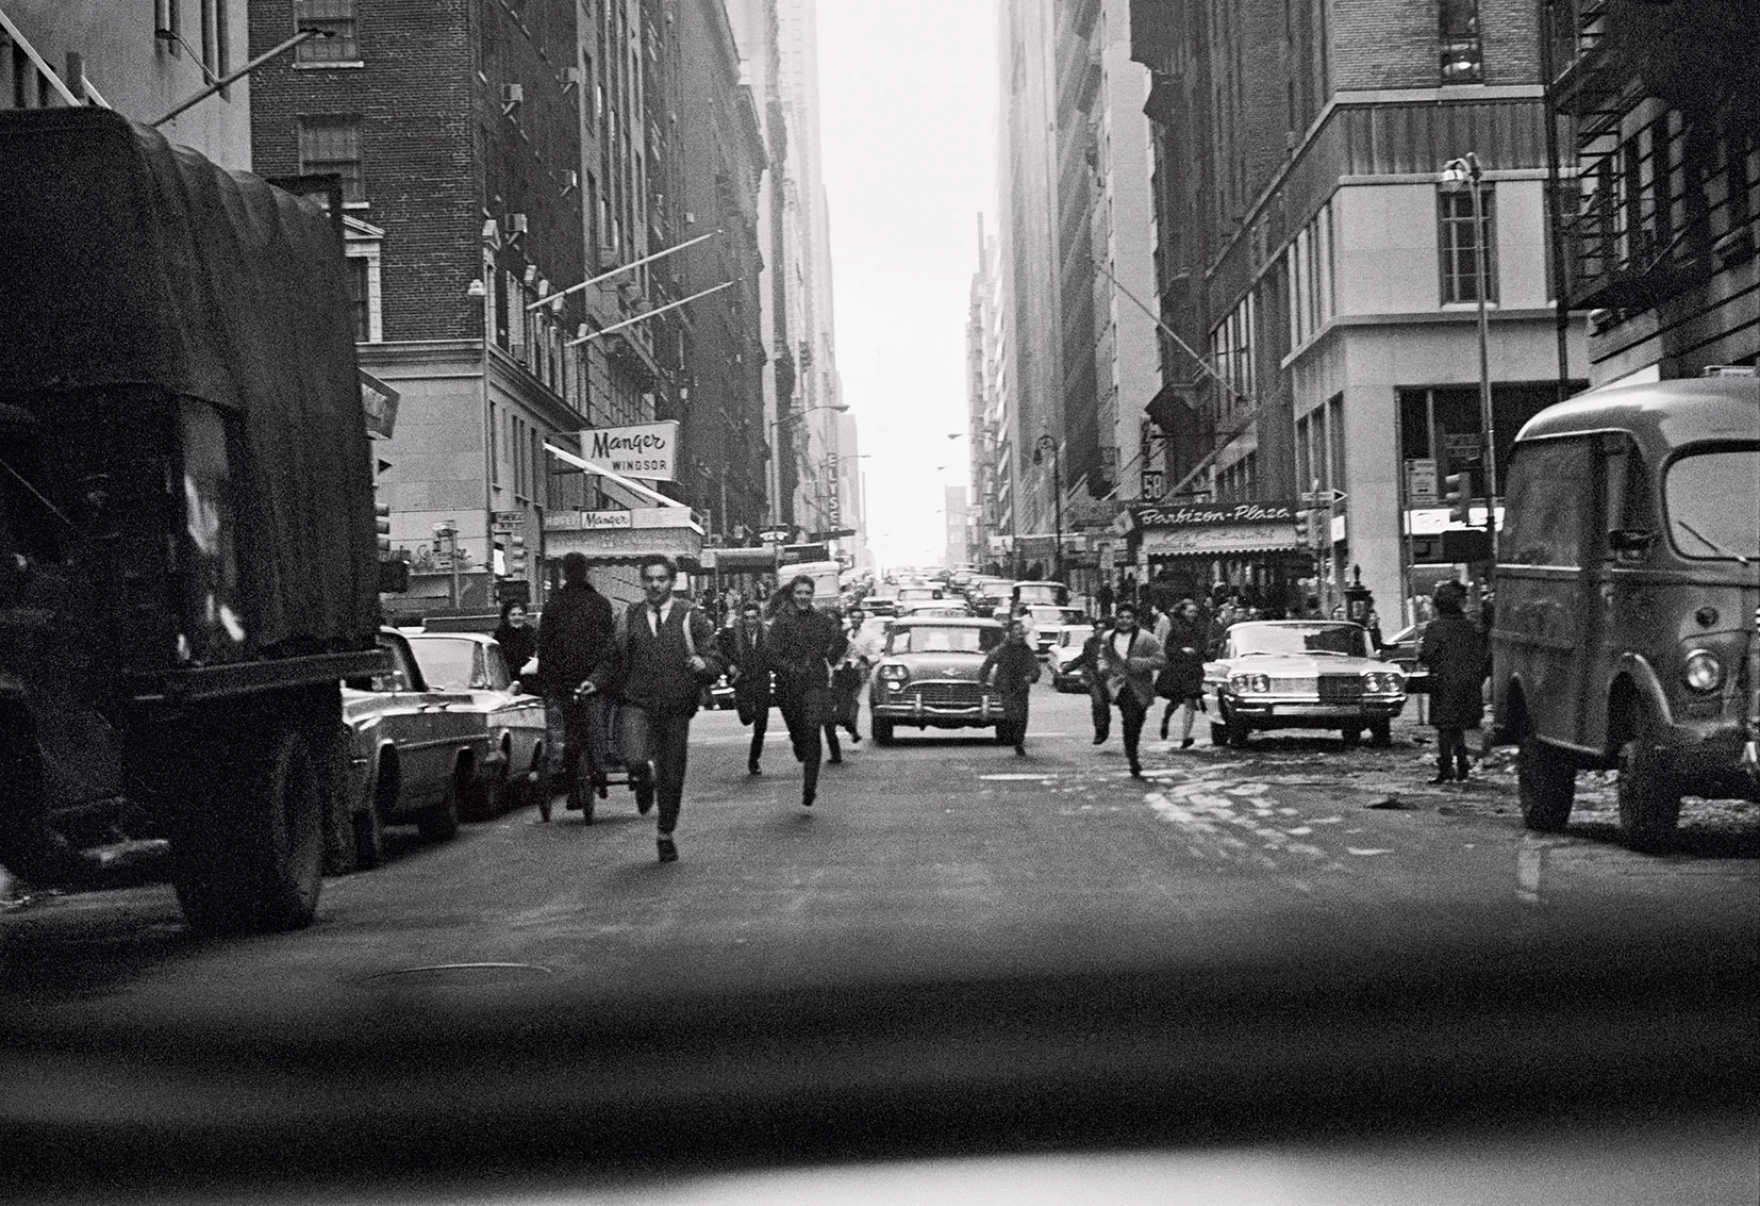 The crowds chasing us in A Hard Day's Night were based on moments like this, McCartney writes. Taken out of the back of our car on West Fifty-Eighth, crossing the Avenue of the Americas.